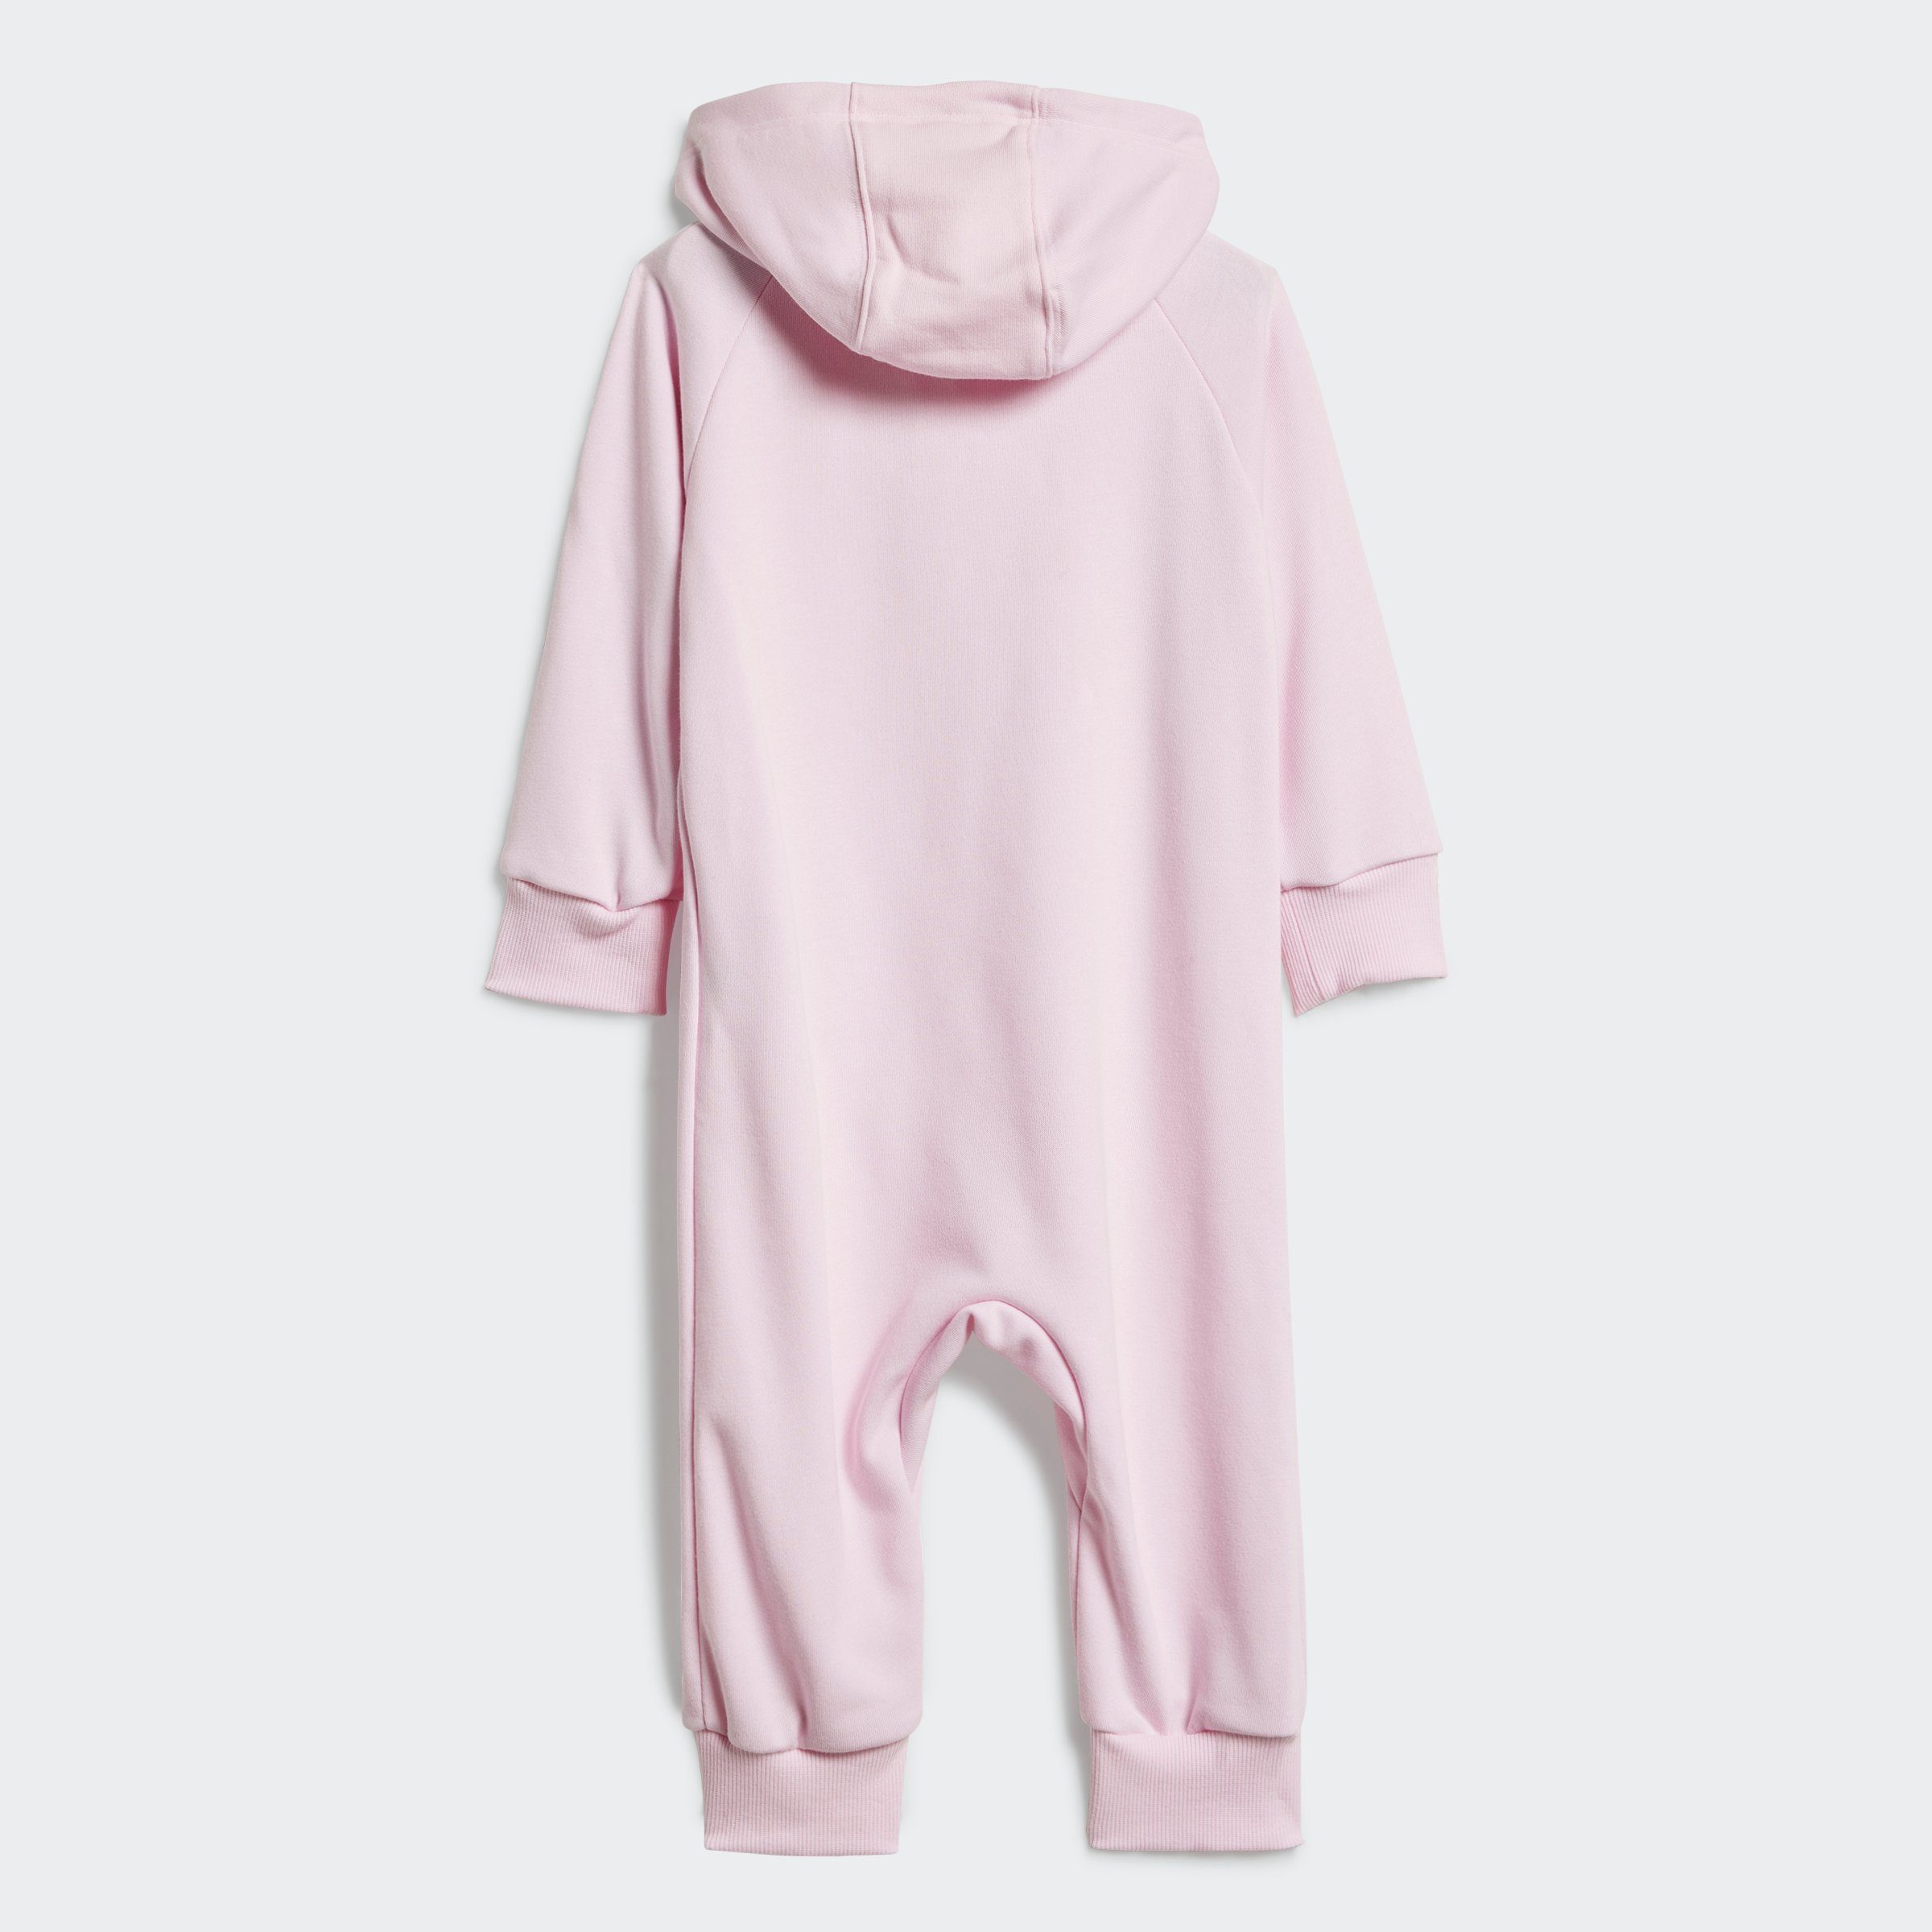 adidas Sportswear Overall Pink / White FT I ONESIE Clear 3S